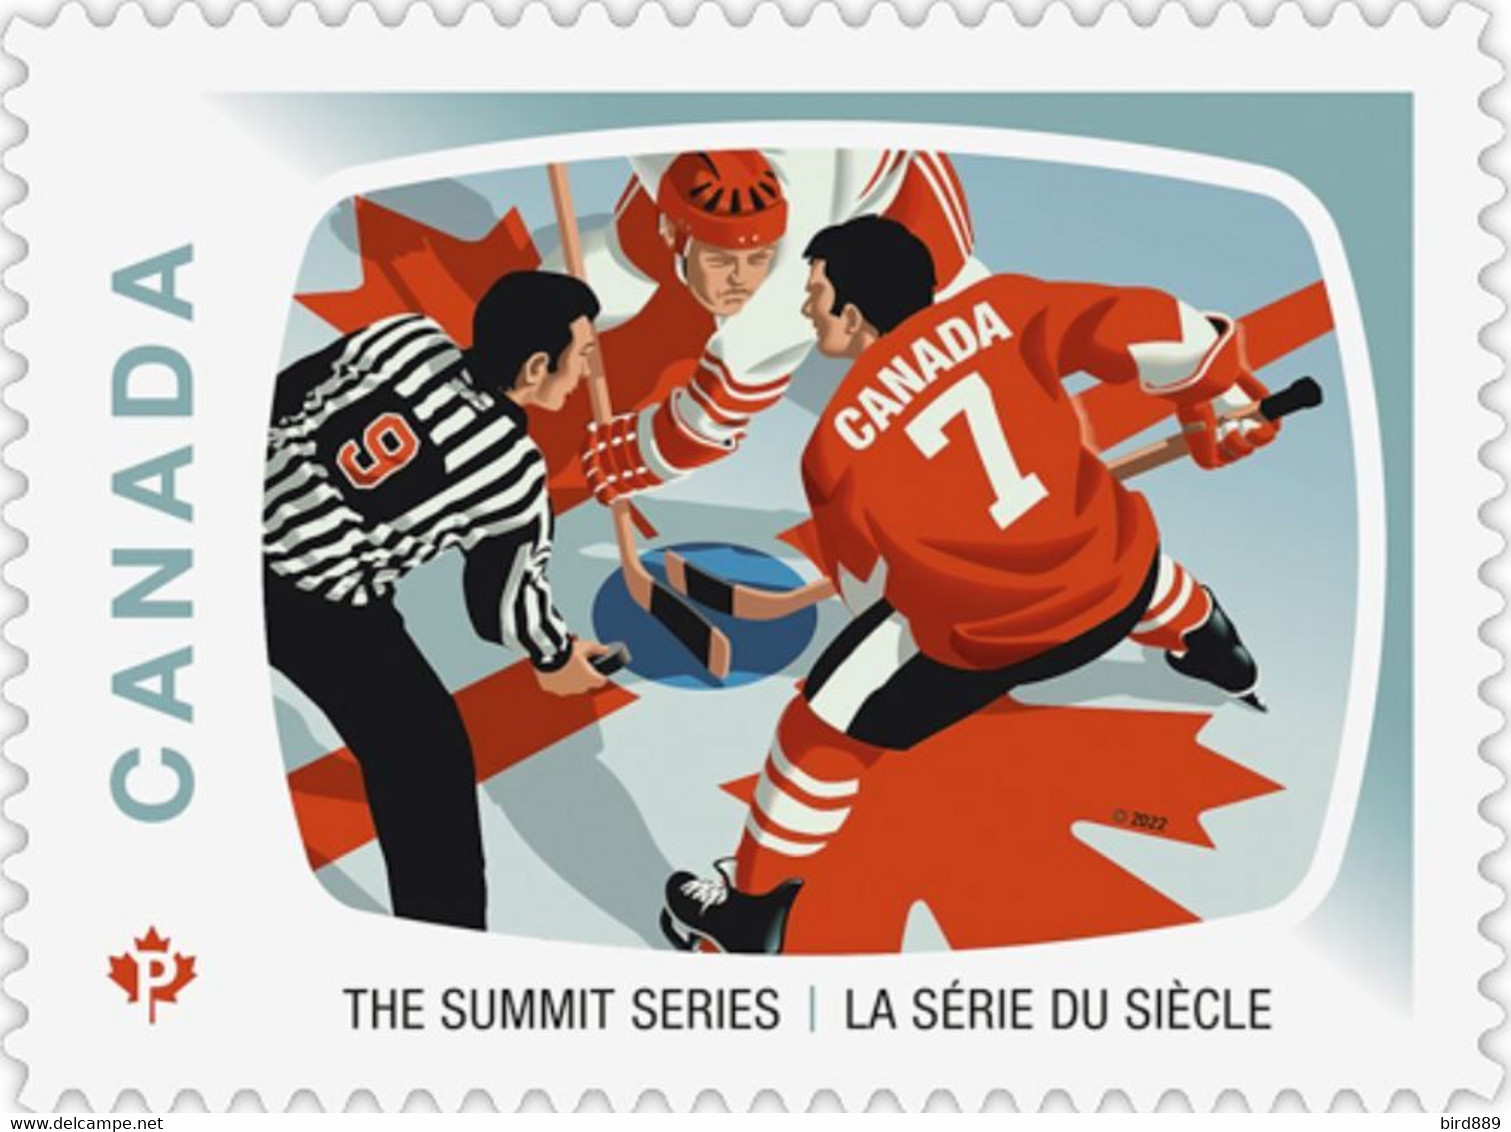 2022 Canada USSR Hockey The Summit Series Single Stamp From Booklet MNH - Francobolli (singoli)